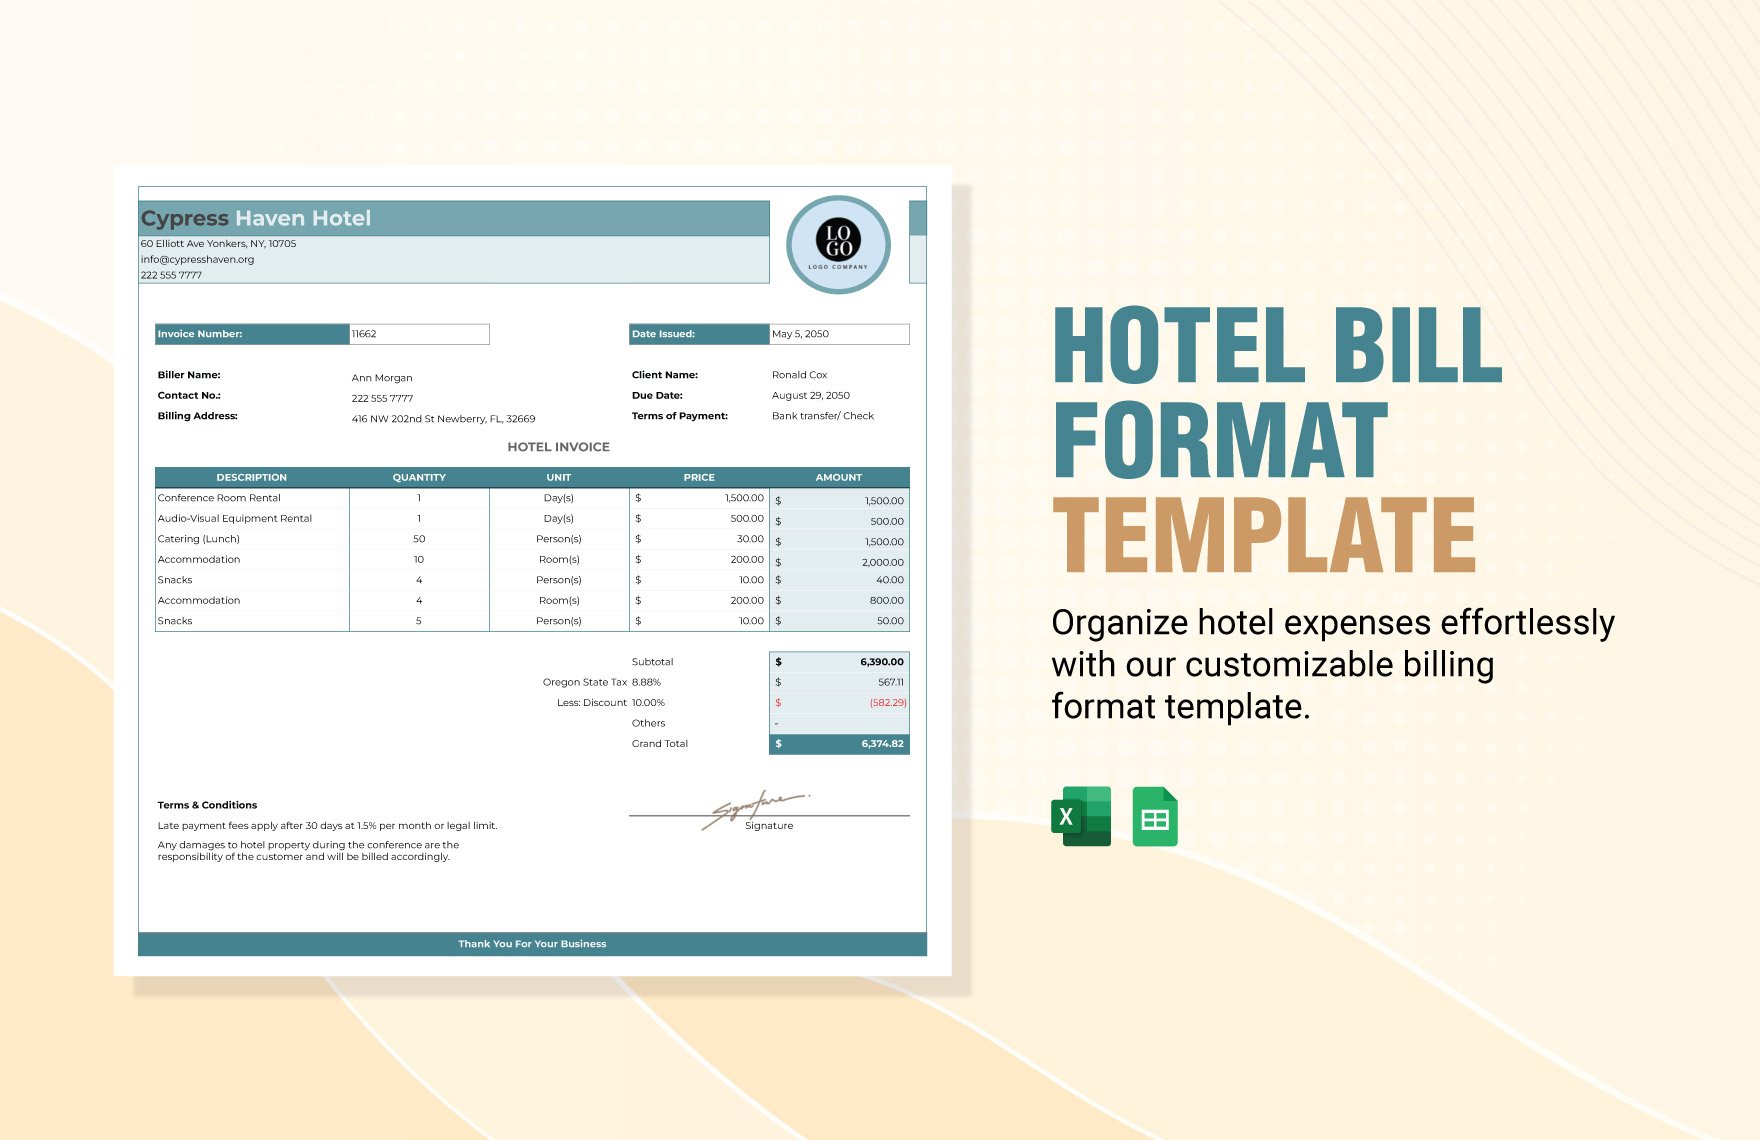 Hotel Bill Format Template in Excel, Google Sheets